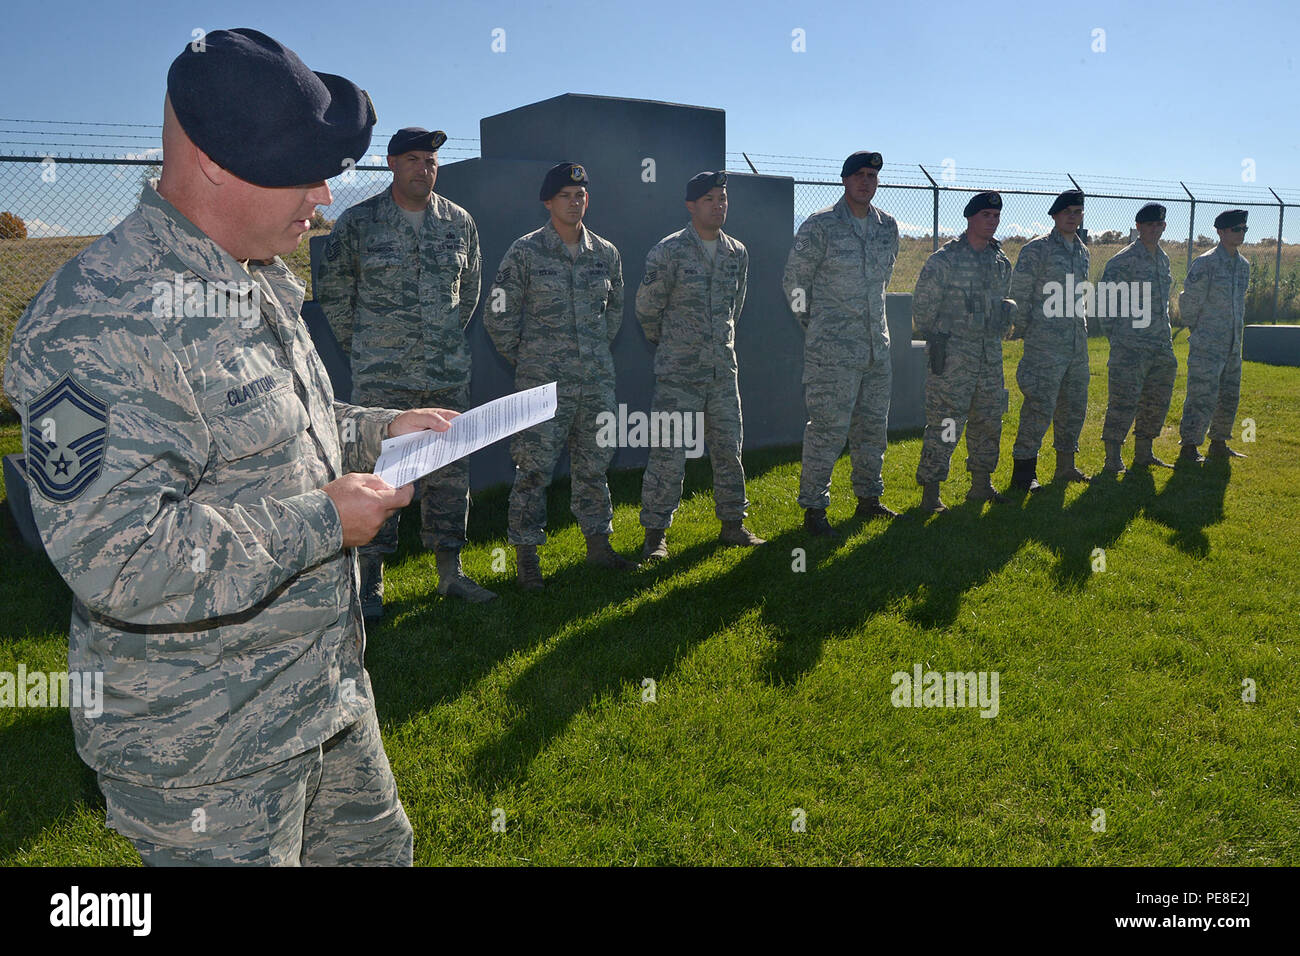 Senior Master Sgt. Douglas F. Clayton, 75th Security Forces Squadron, reads a U.S. Forest Service letter of recognition to 75th SFS Airmen at Hill Air Force Base, Utah, Oct. 26, 2015. The Airmen, military working dog handlers, were training with the Forest Service in the Uinta-Wasatch-Cache National Forest when an emergency medical call was received. To aid an injured person, they carried packs, a litter and other supplies more than two miles at elevations of 7,500 feet. Once at the scene, they coordinated a safe landing for an emergency helicopter and then carried the victim to the helicopter Stock Photo